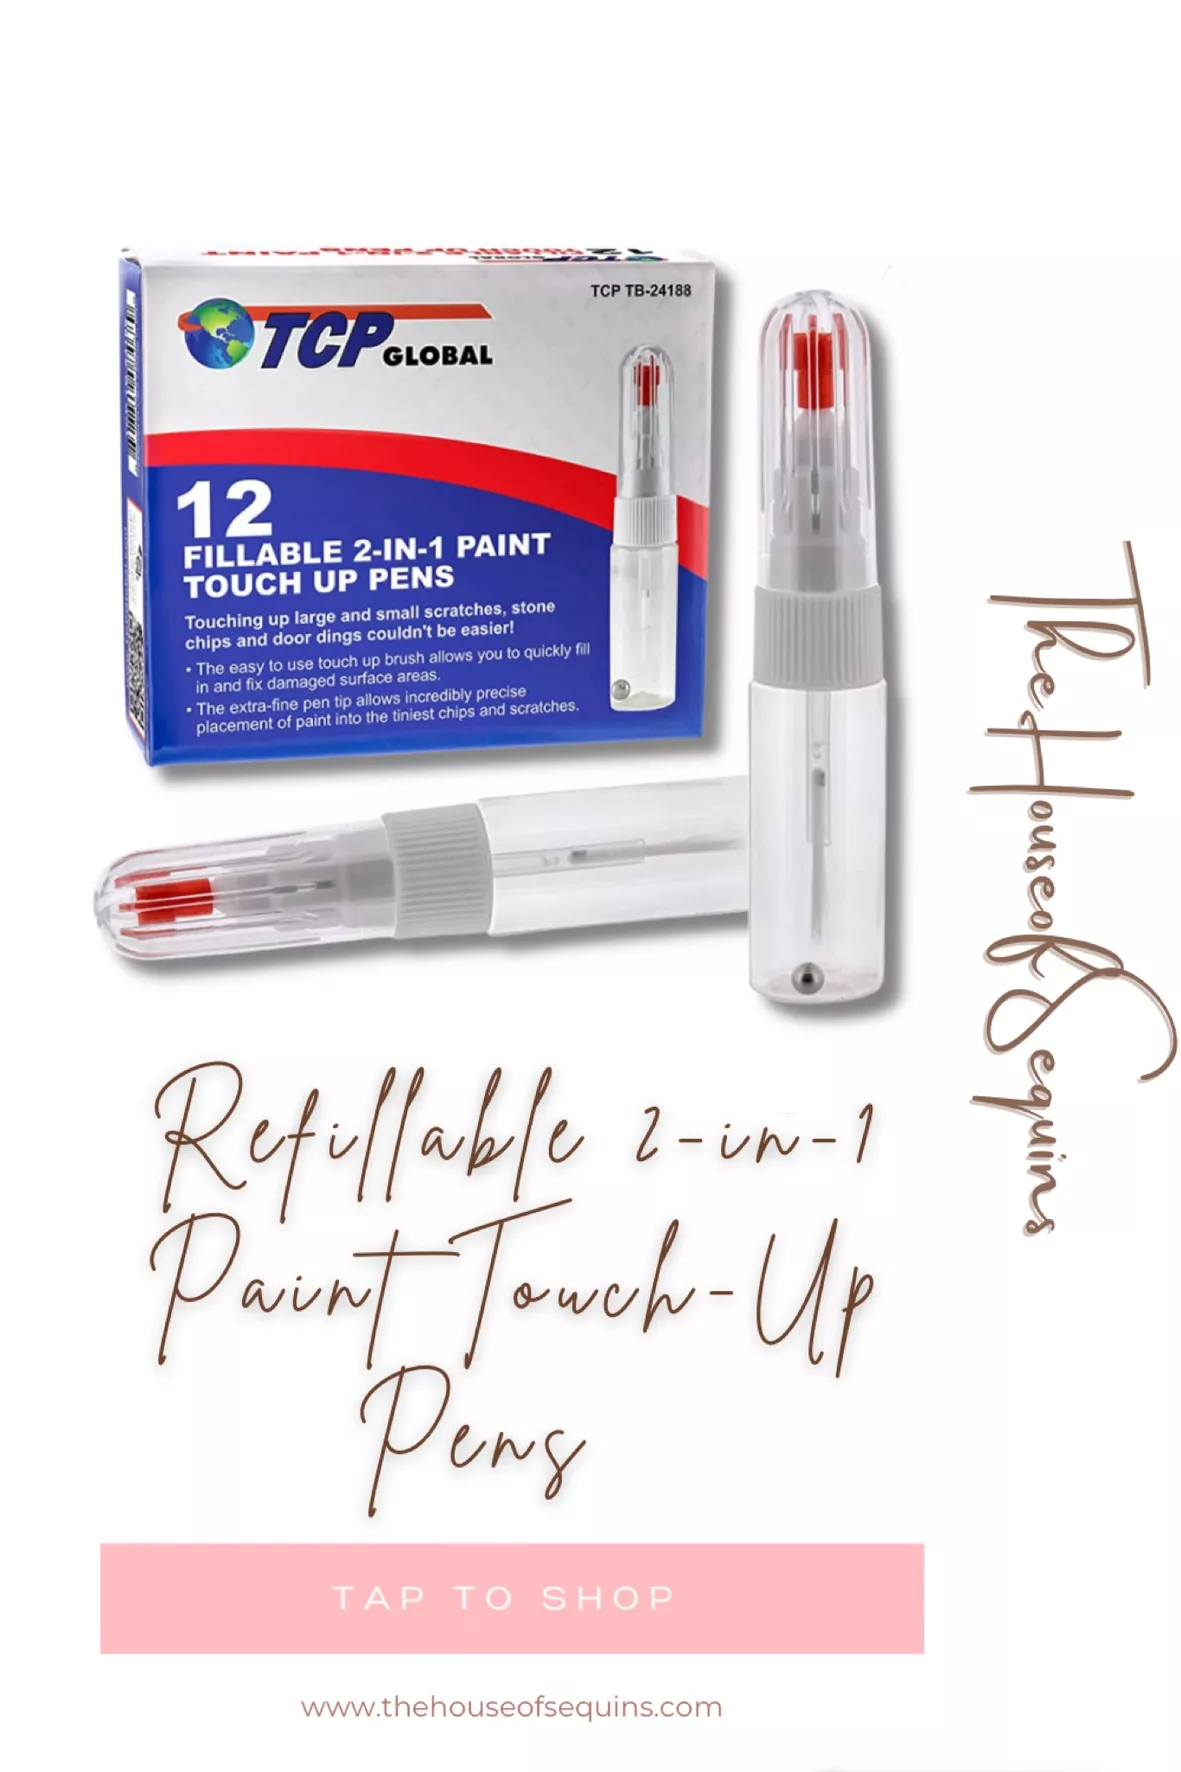 One of my favorite  Finds! This refillable paint touch-up